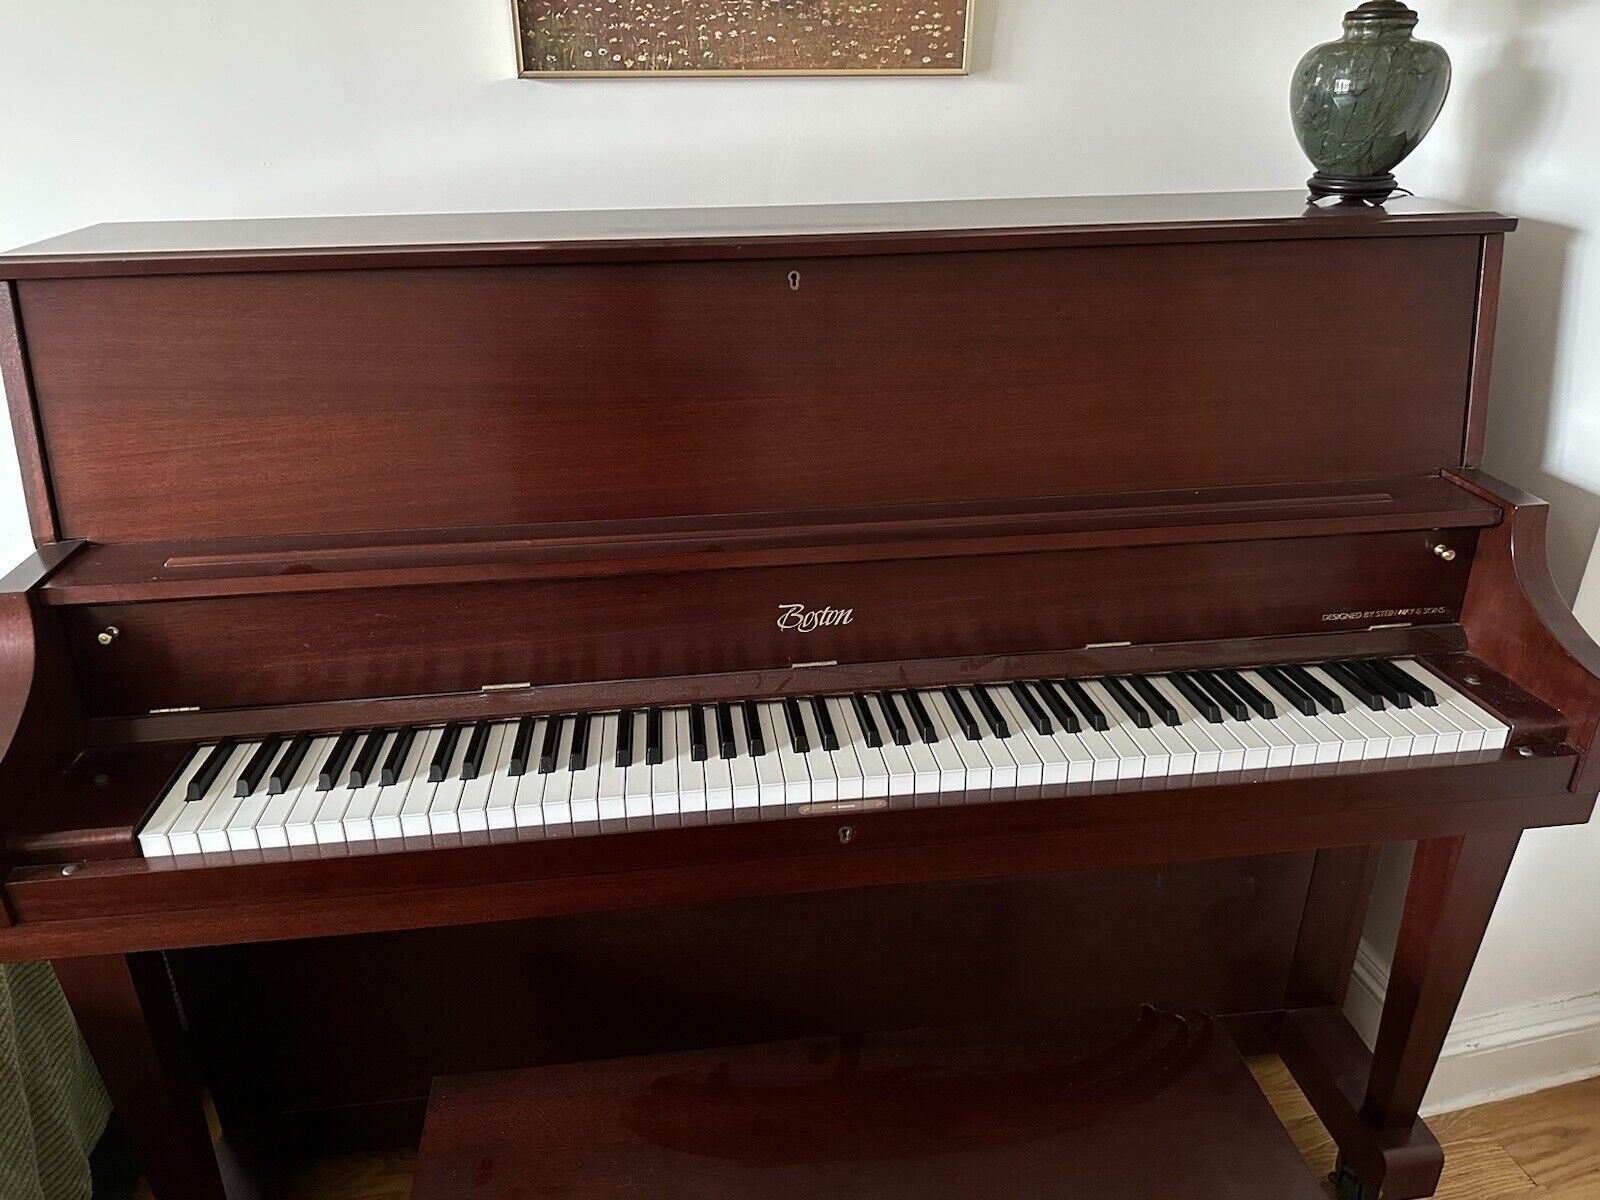 Steinway Upright Grand Model K Piano1982 Satin Ebony - Excellent Condition 